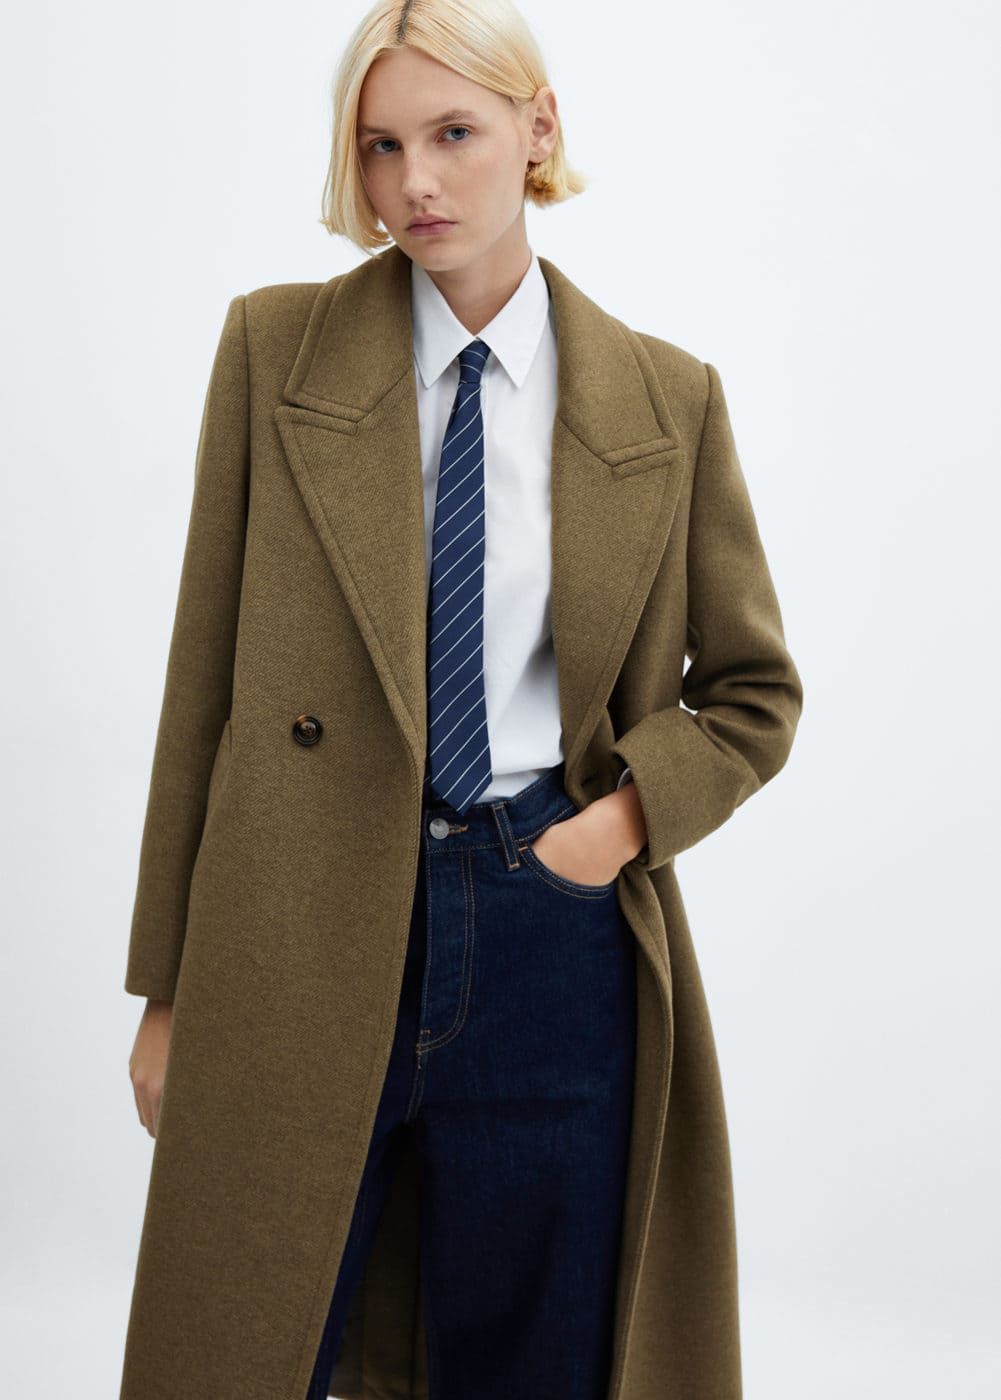 13 Elevated Winter Outfit Ideas With Long Coats | Who What Wear